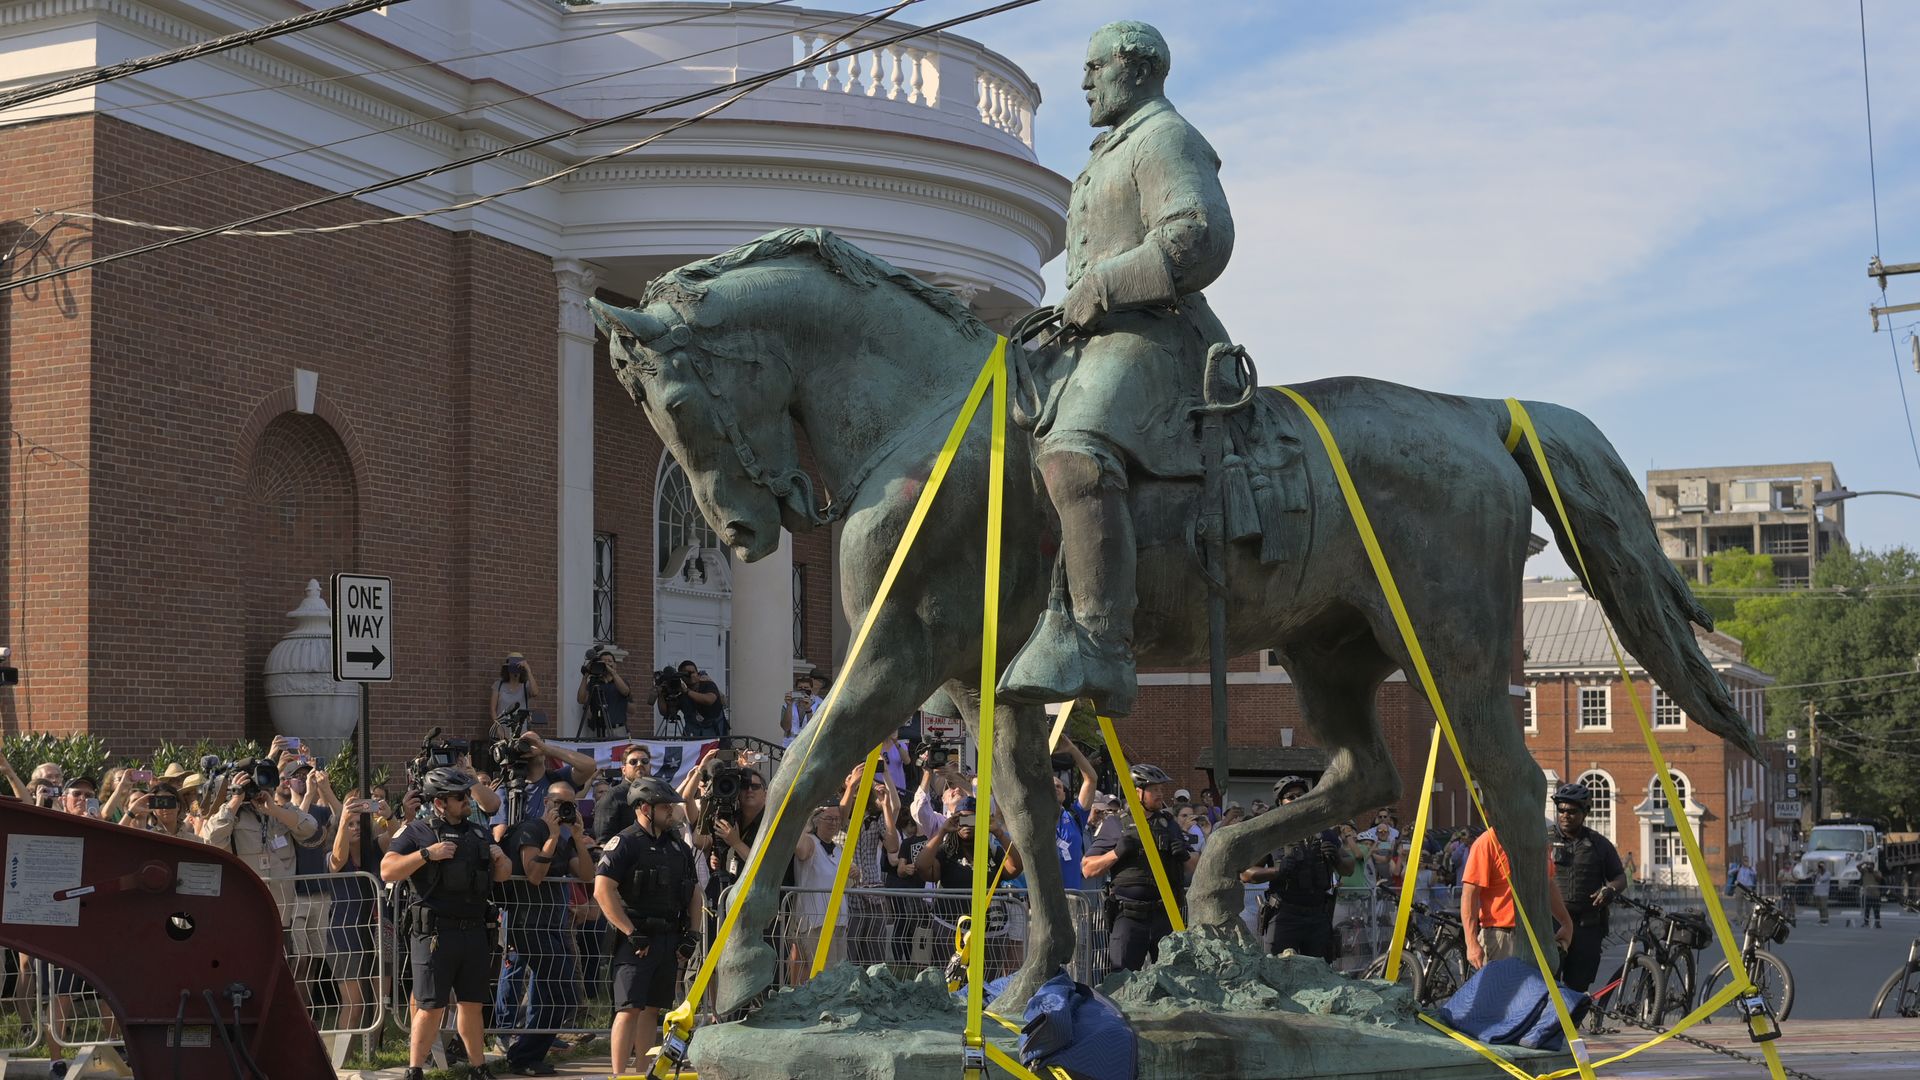 A statue of Confederate general Robert E Lee located in Charlottesvilles is transported away on East Jefferson street.